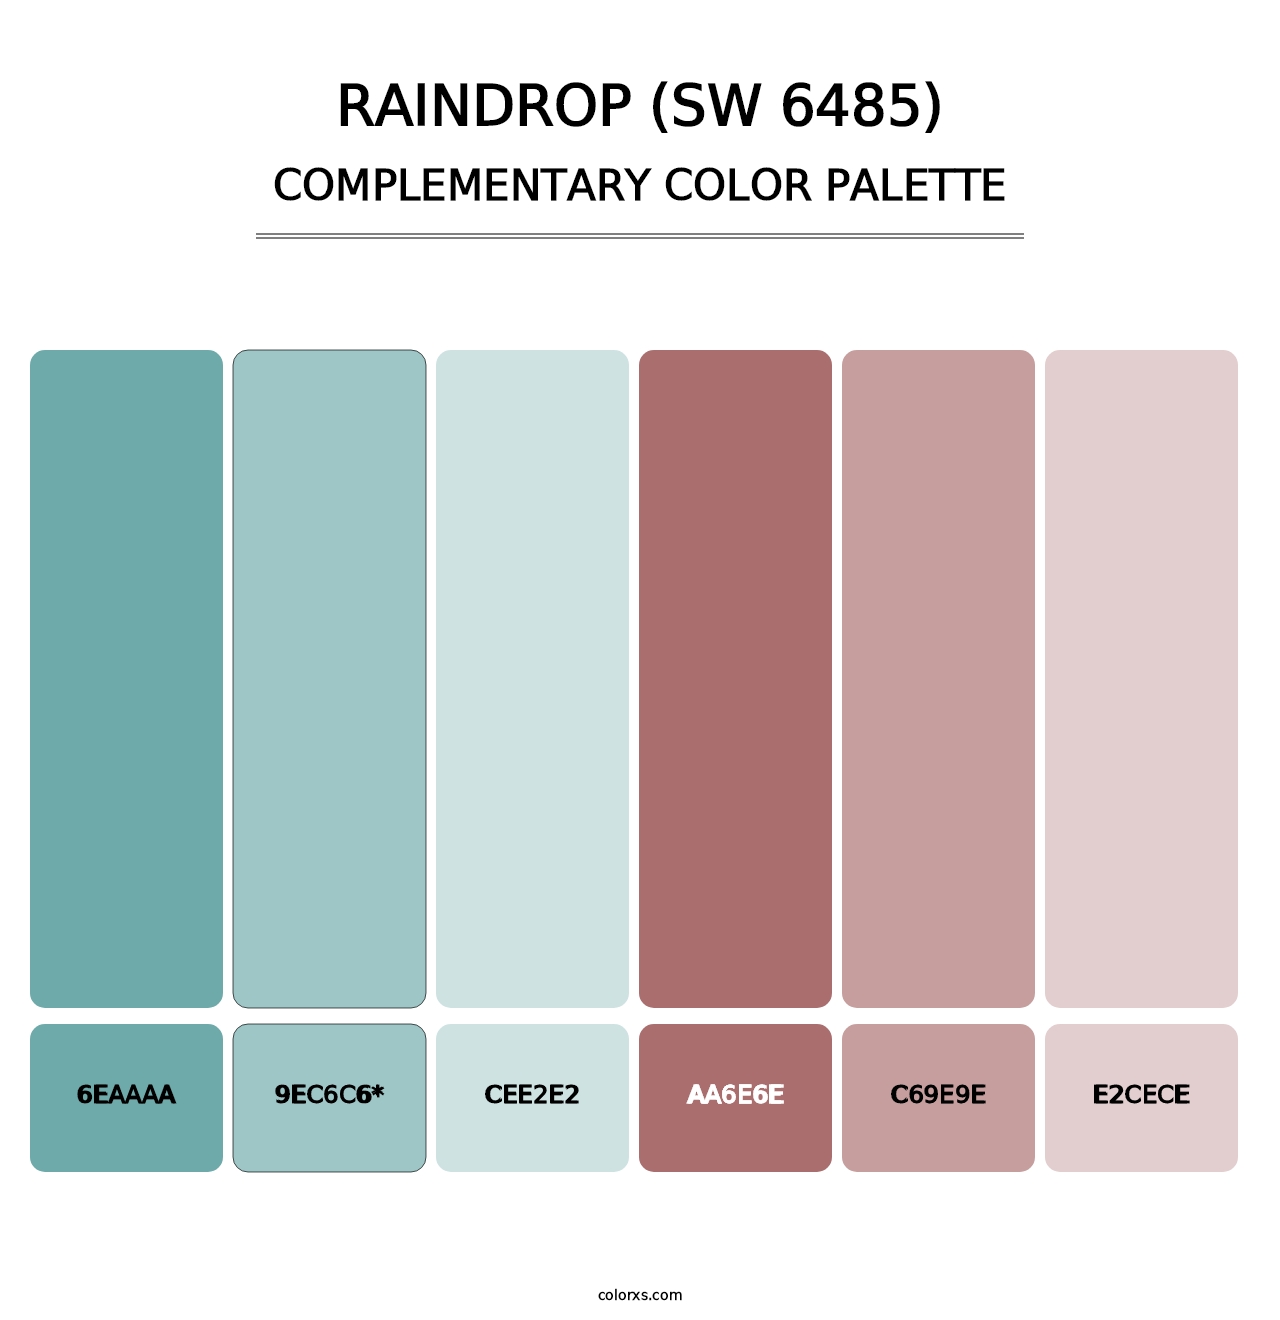 Raindrop (SW 6485) - Complementary Color Palette